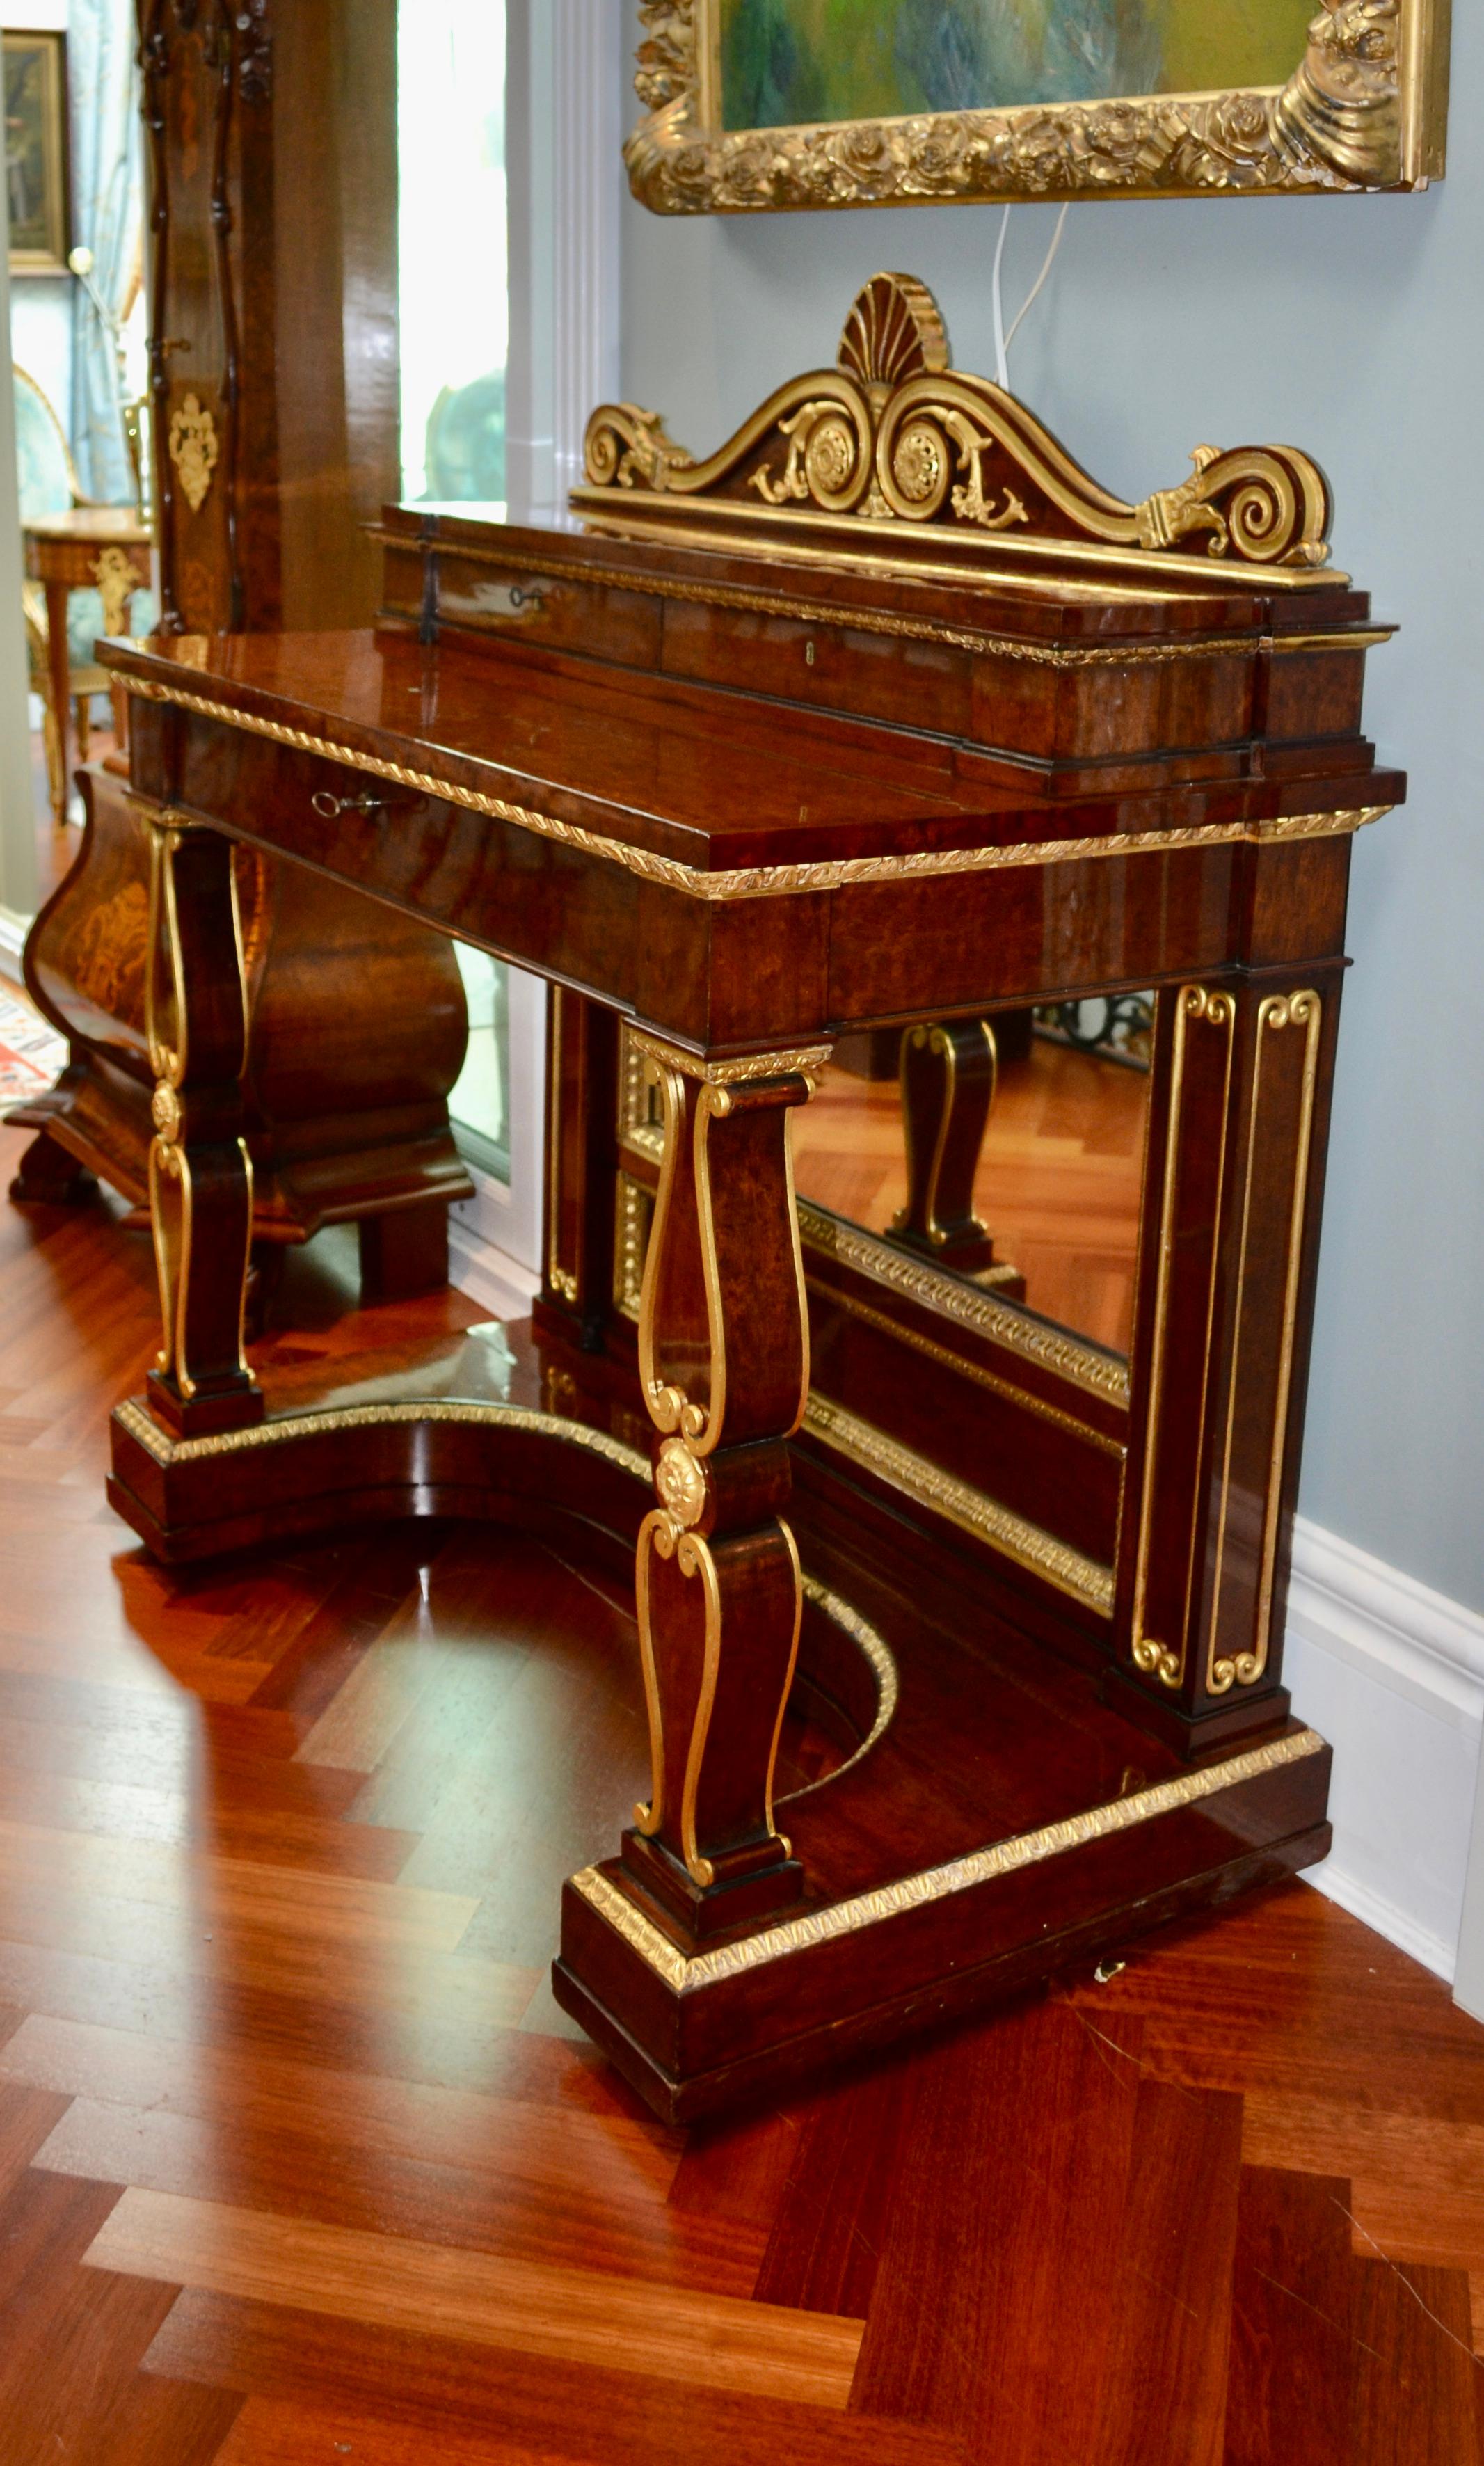  An Exceptional English Regency Dressing Table with a Royal Family Provenance 6